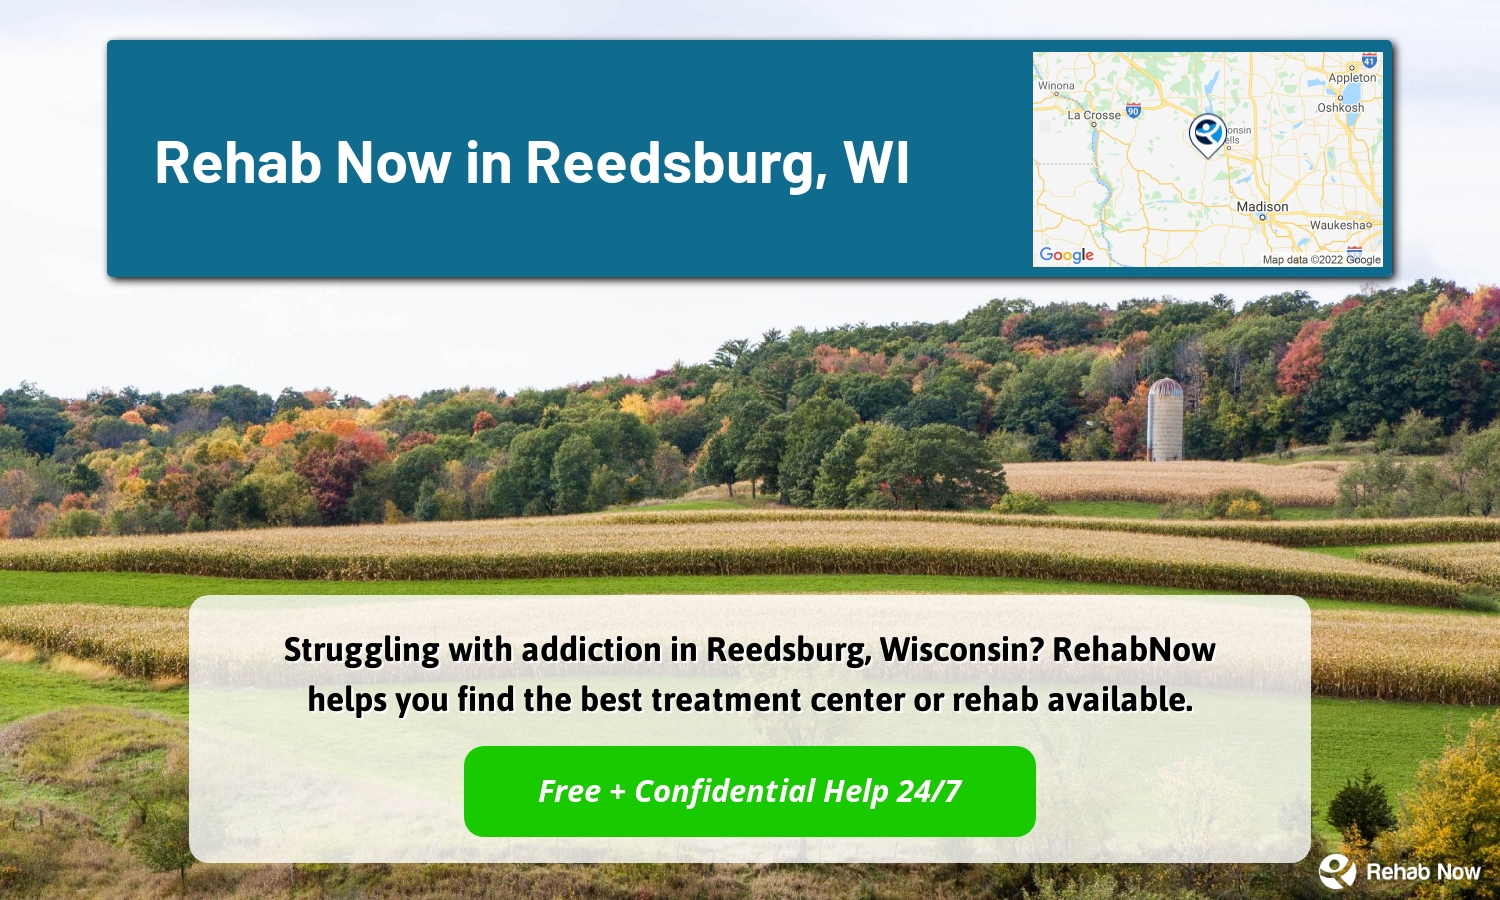 Struggling with addiction in Reedsburg, Wisconsin? RehabNow helps you find the best treatment center or rehab available.